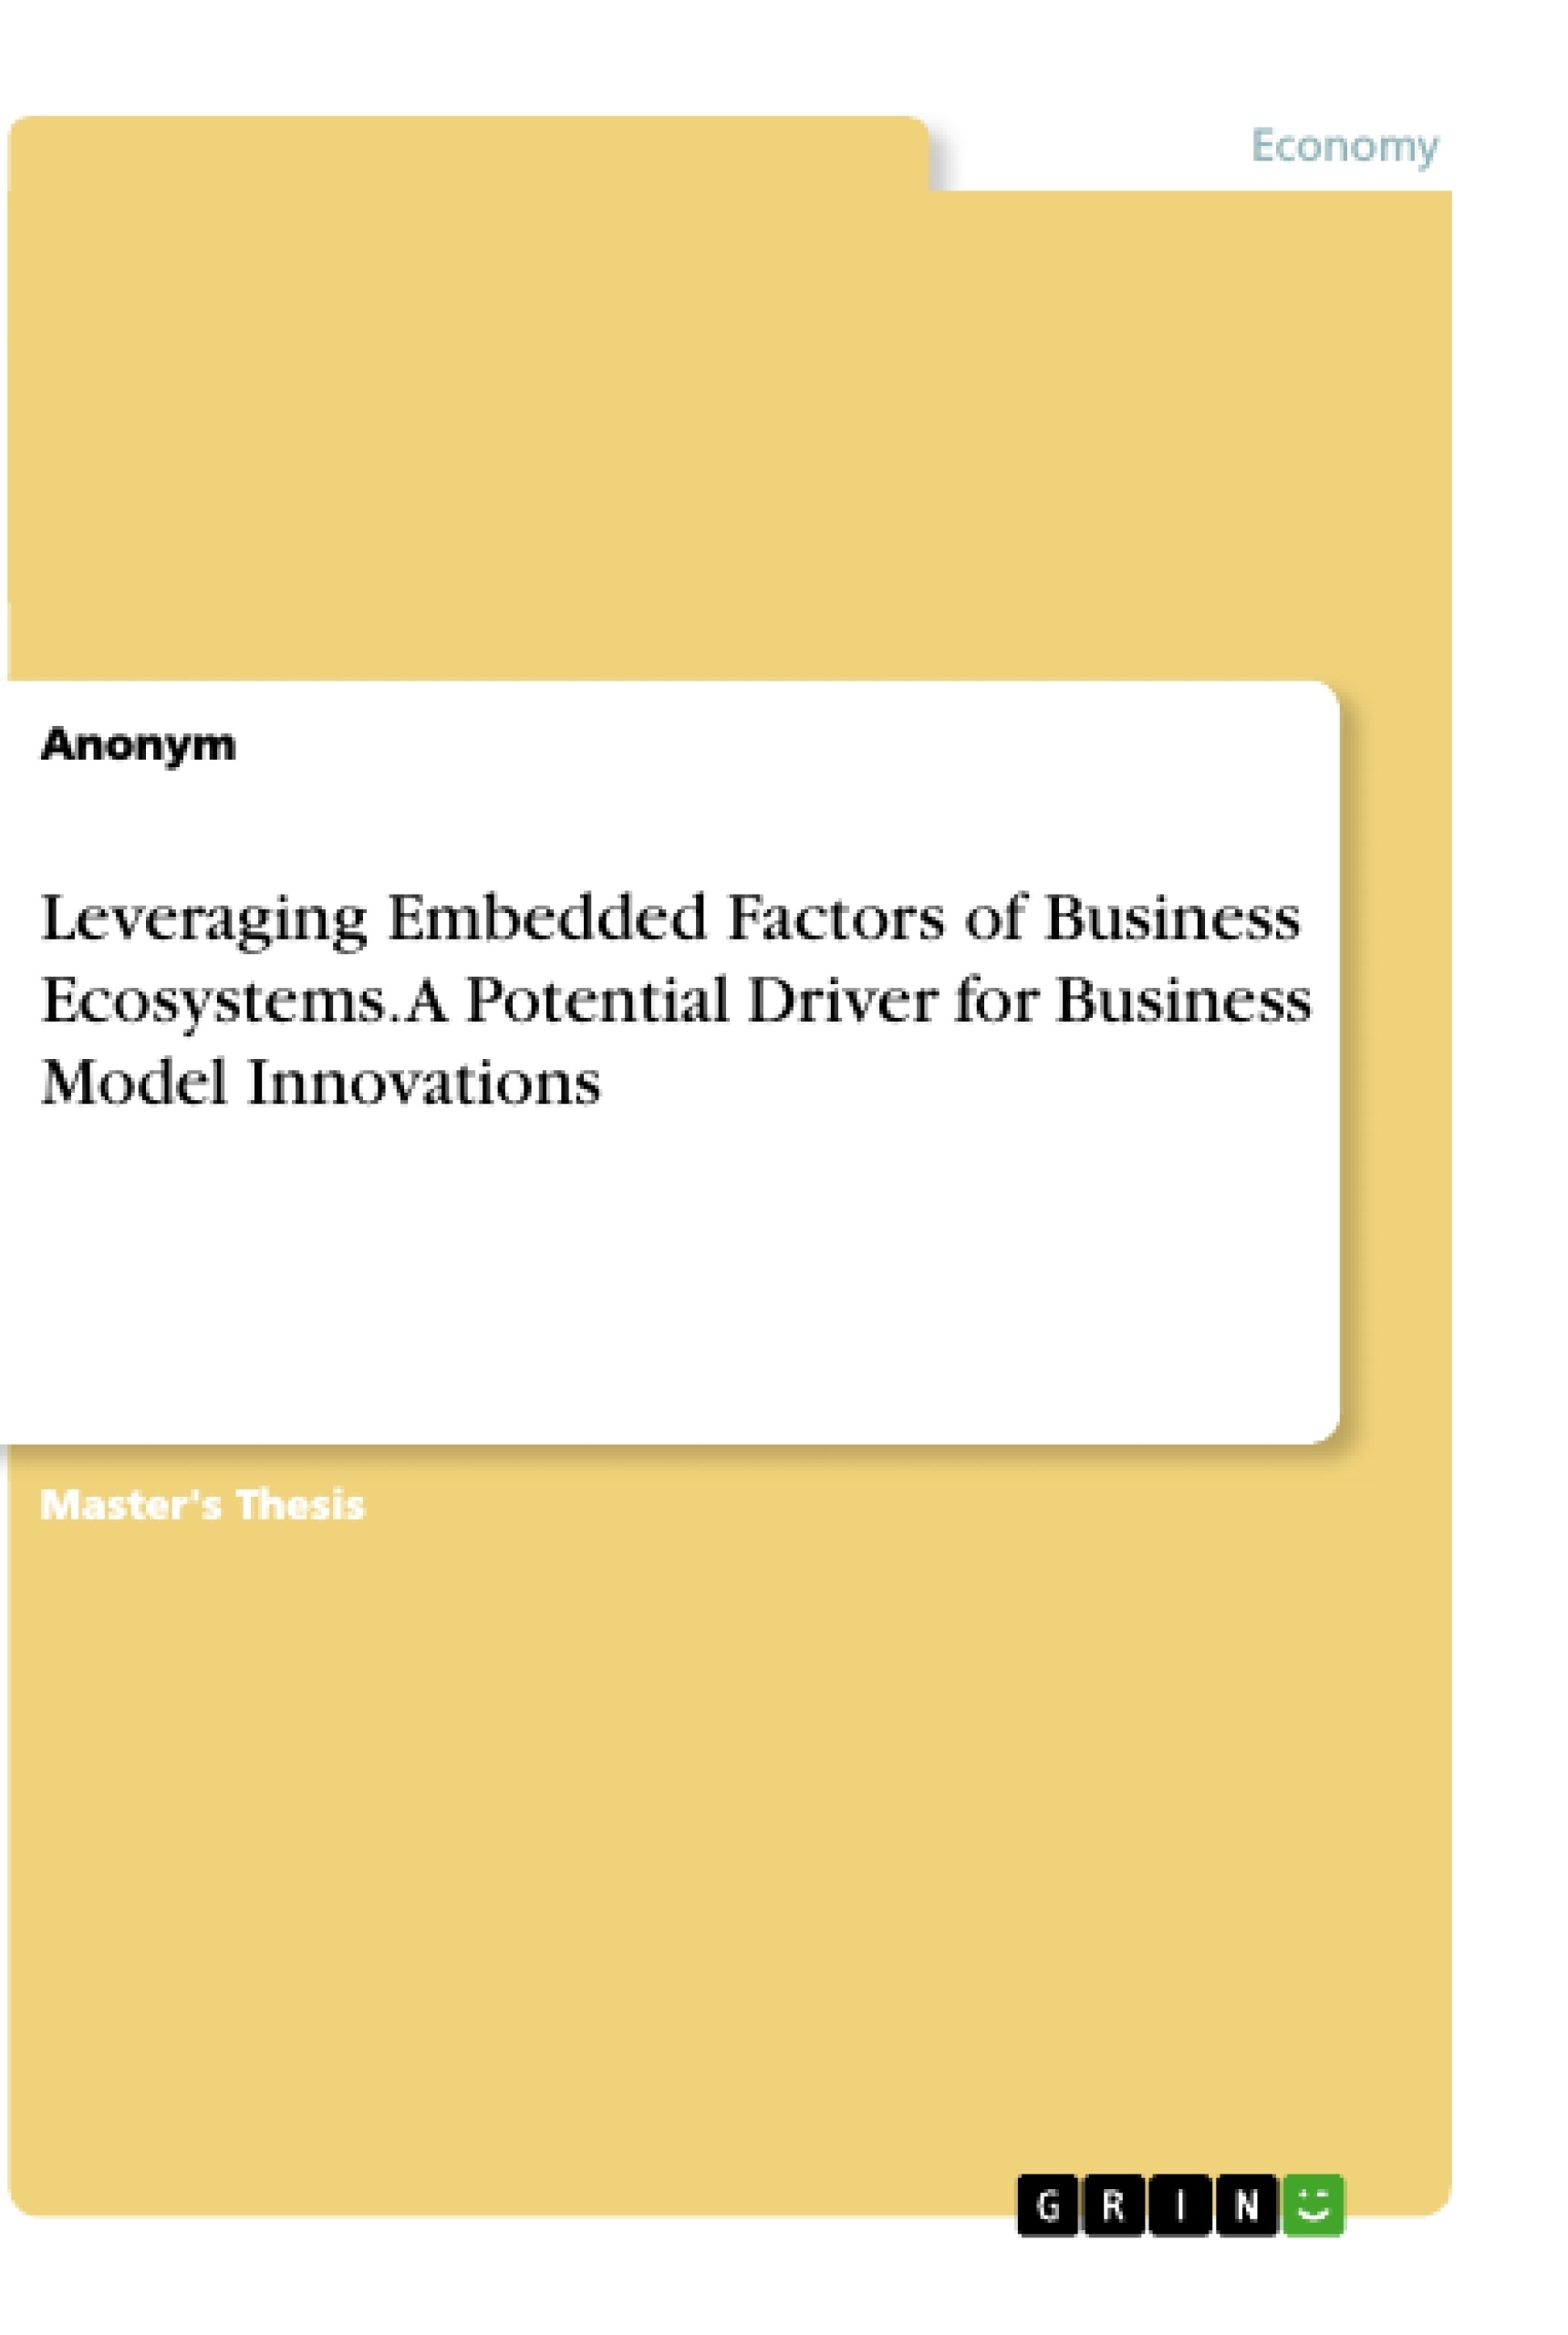 Title: Leveraging Embedded Factors of Business Ecosystems. A Potential Driver for Business Model Innovations